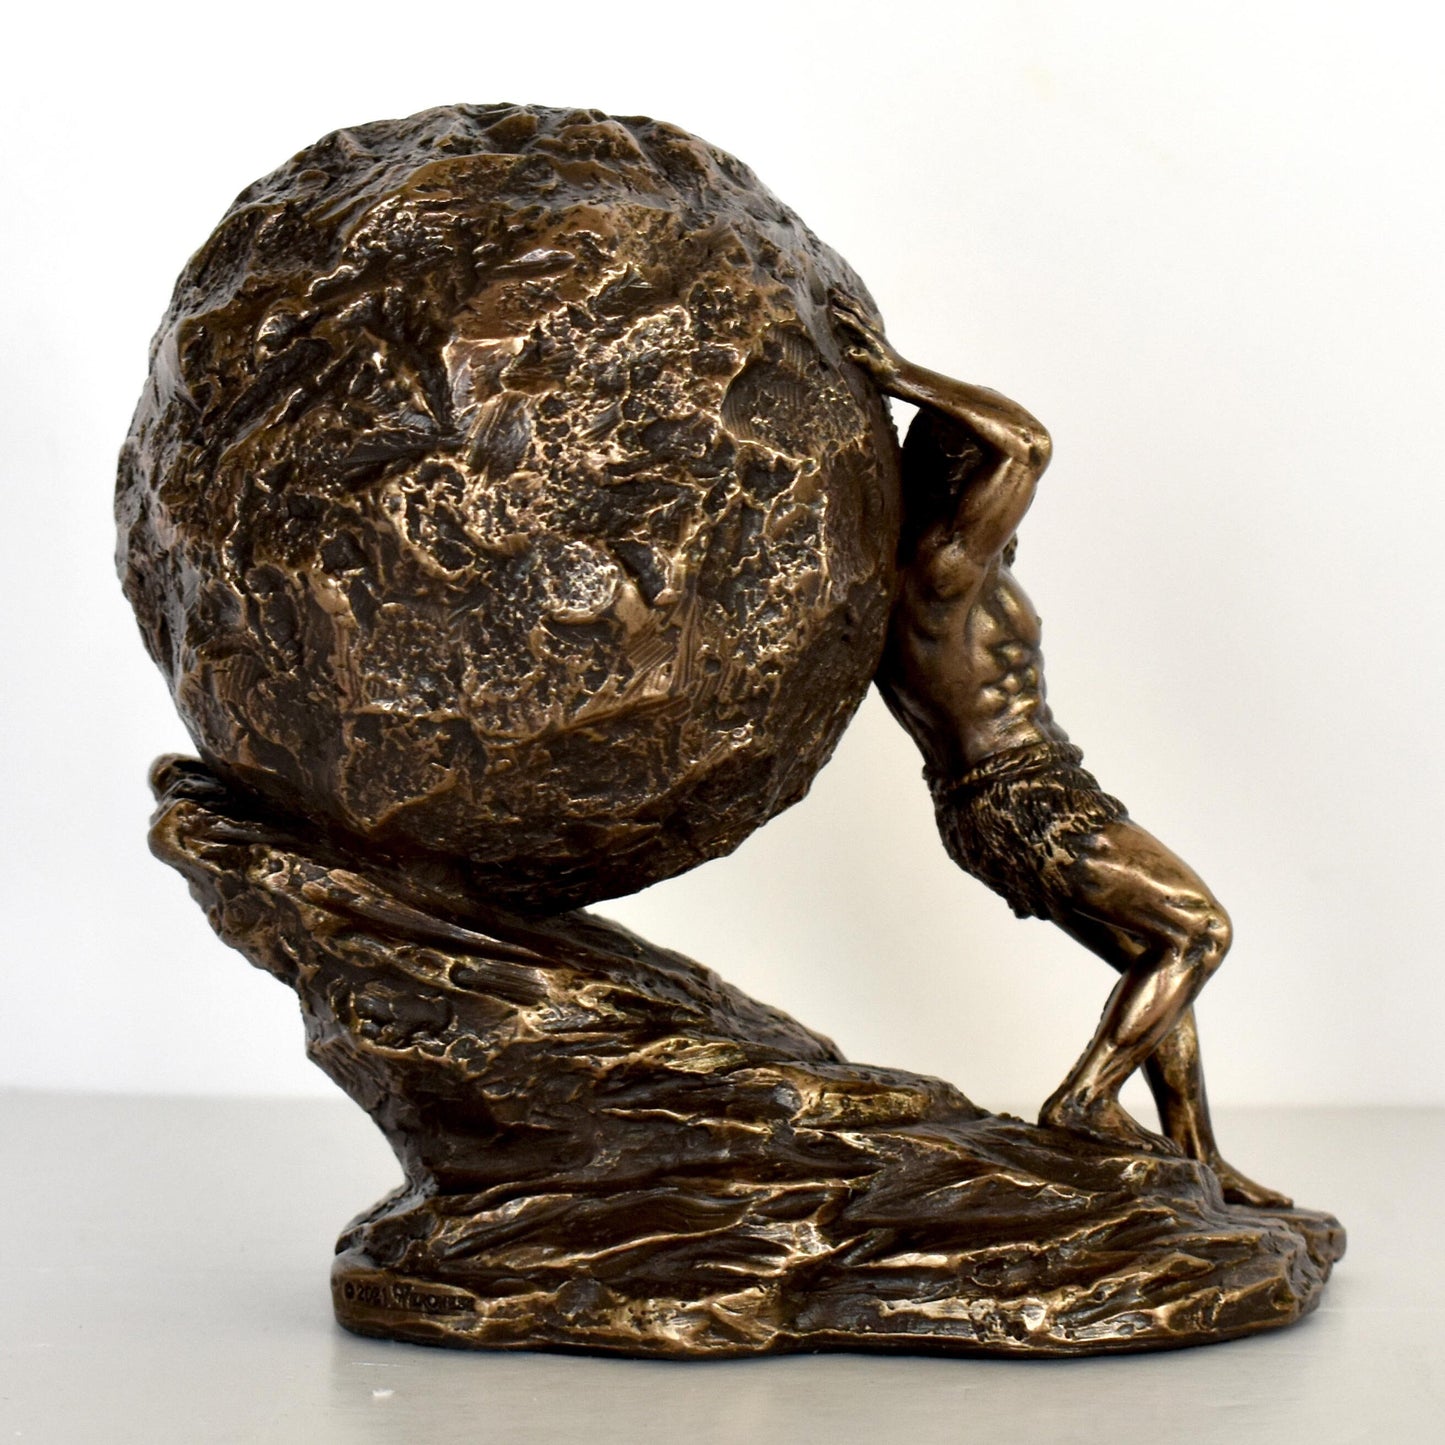 Sisyphus Sisyphos - Hades punished him  to roll a boulder up a hill and to roll down every time it neared the top - Cold Cast Bronze Resin